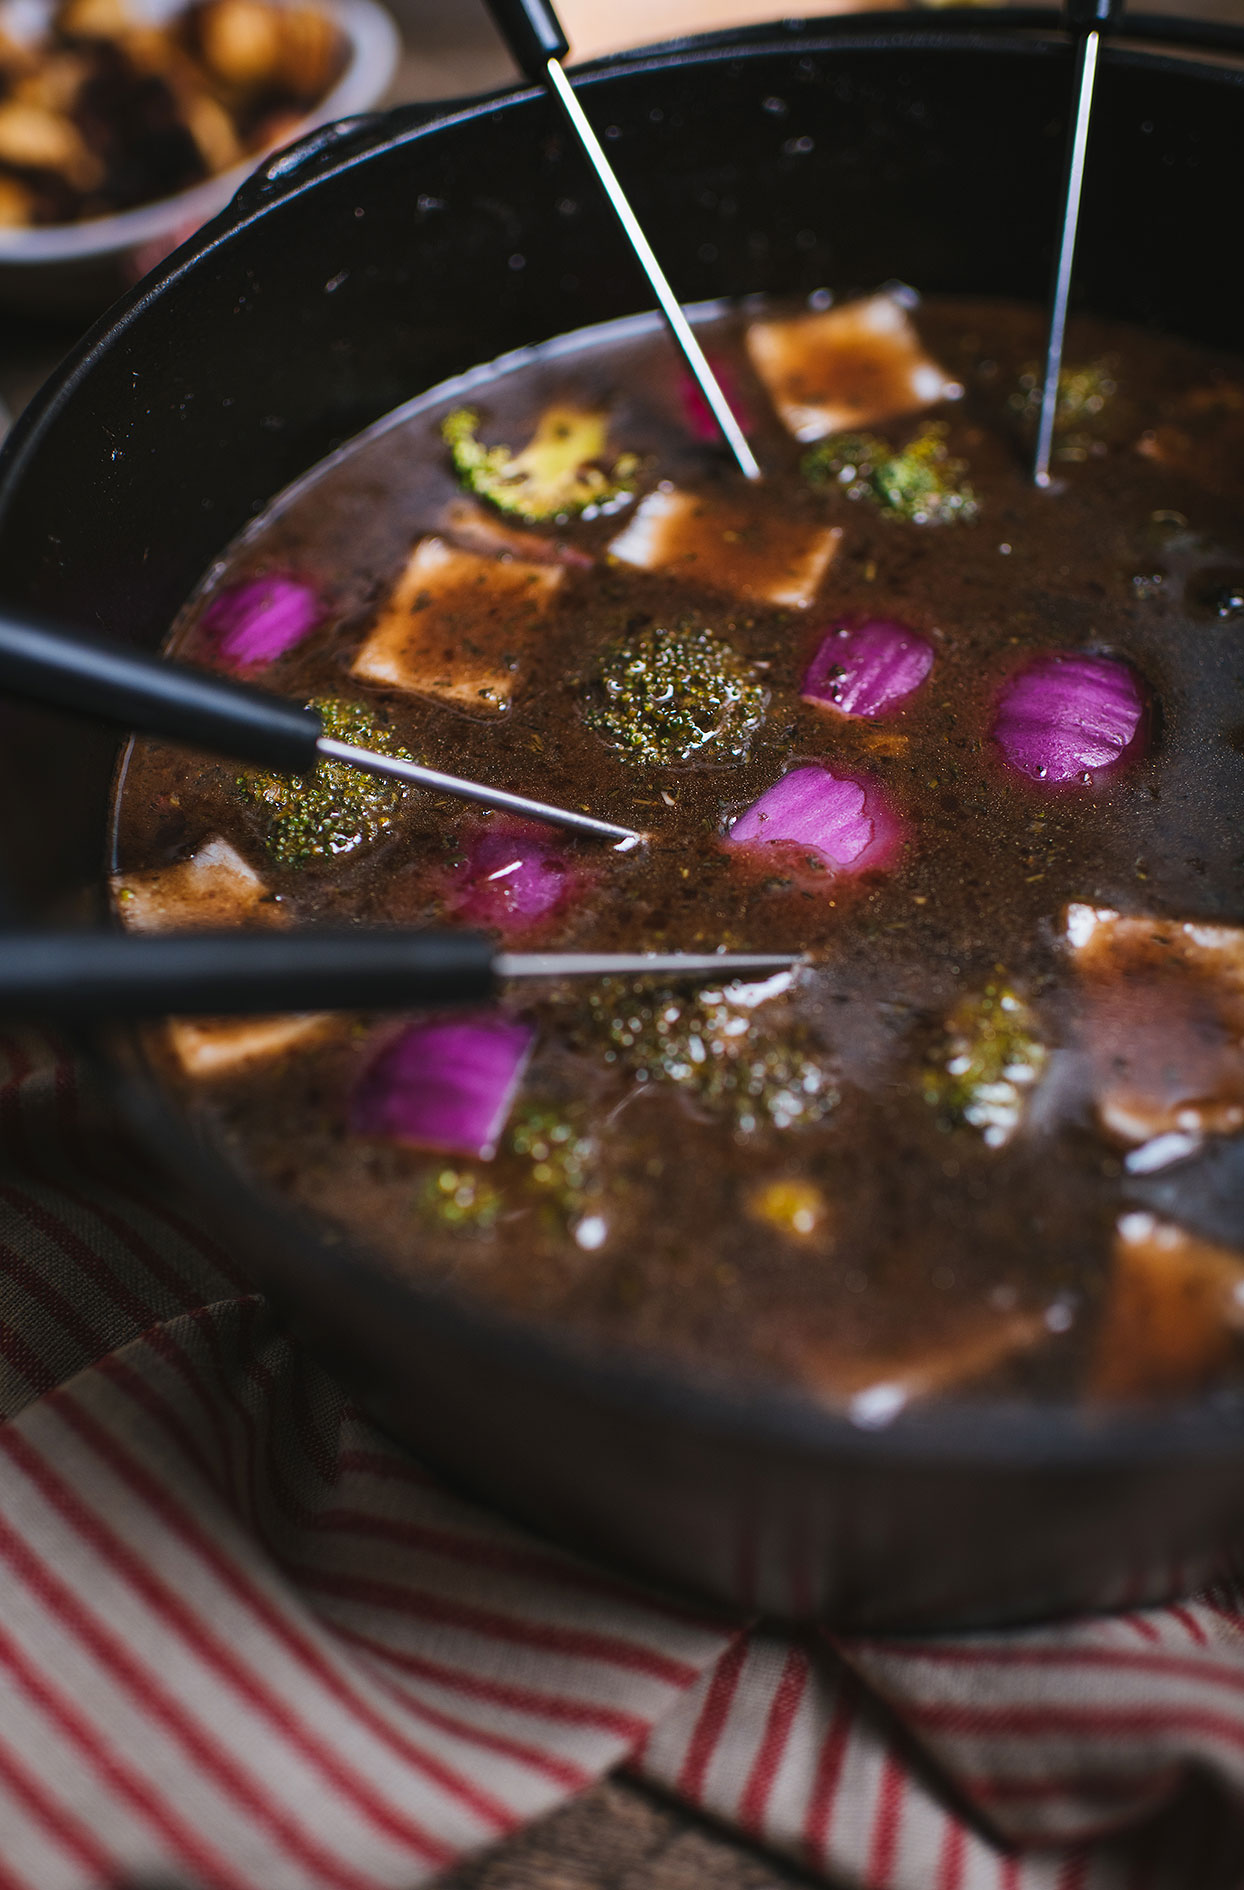 Classic fondue broth with beer and red wine